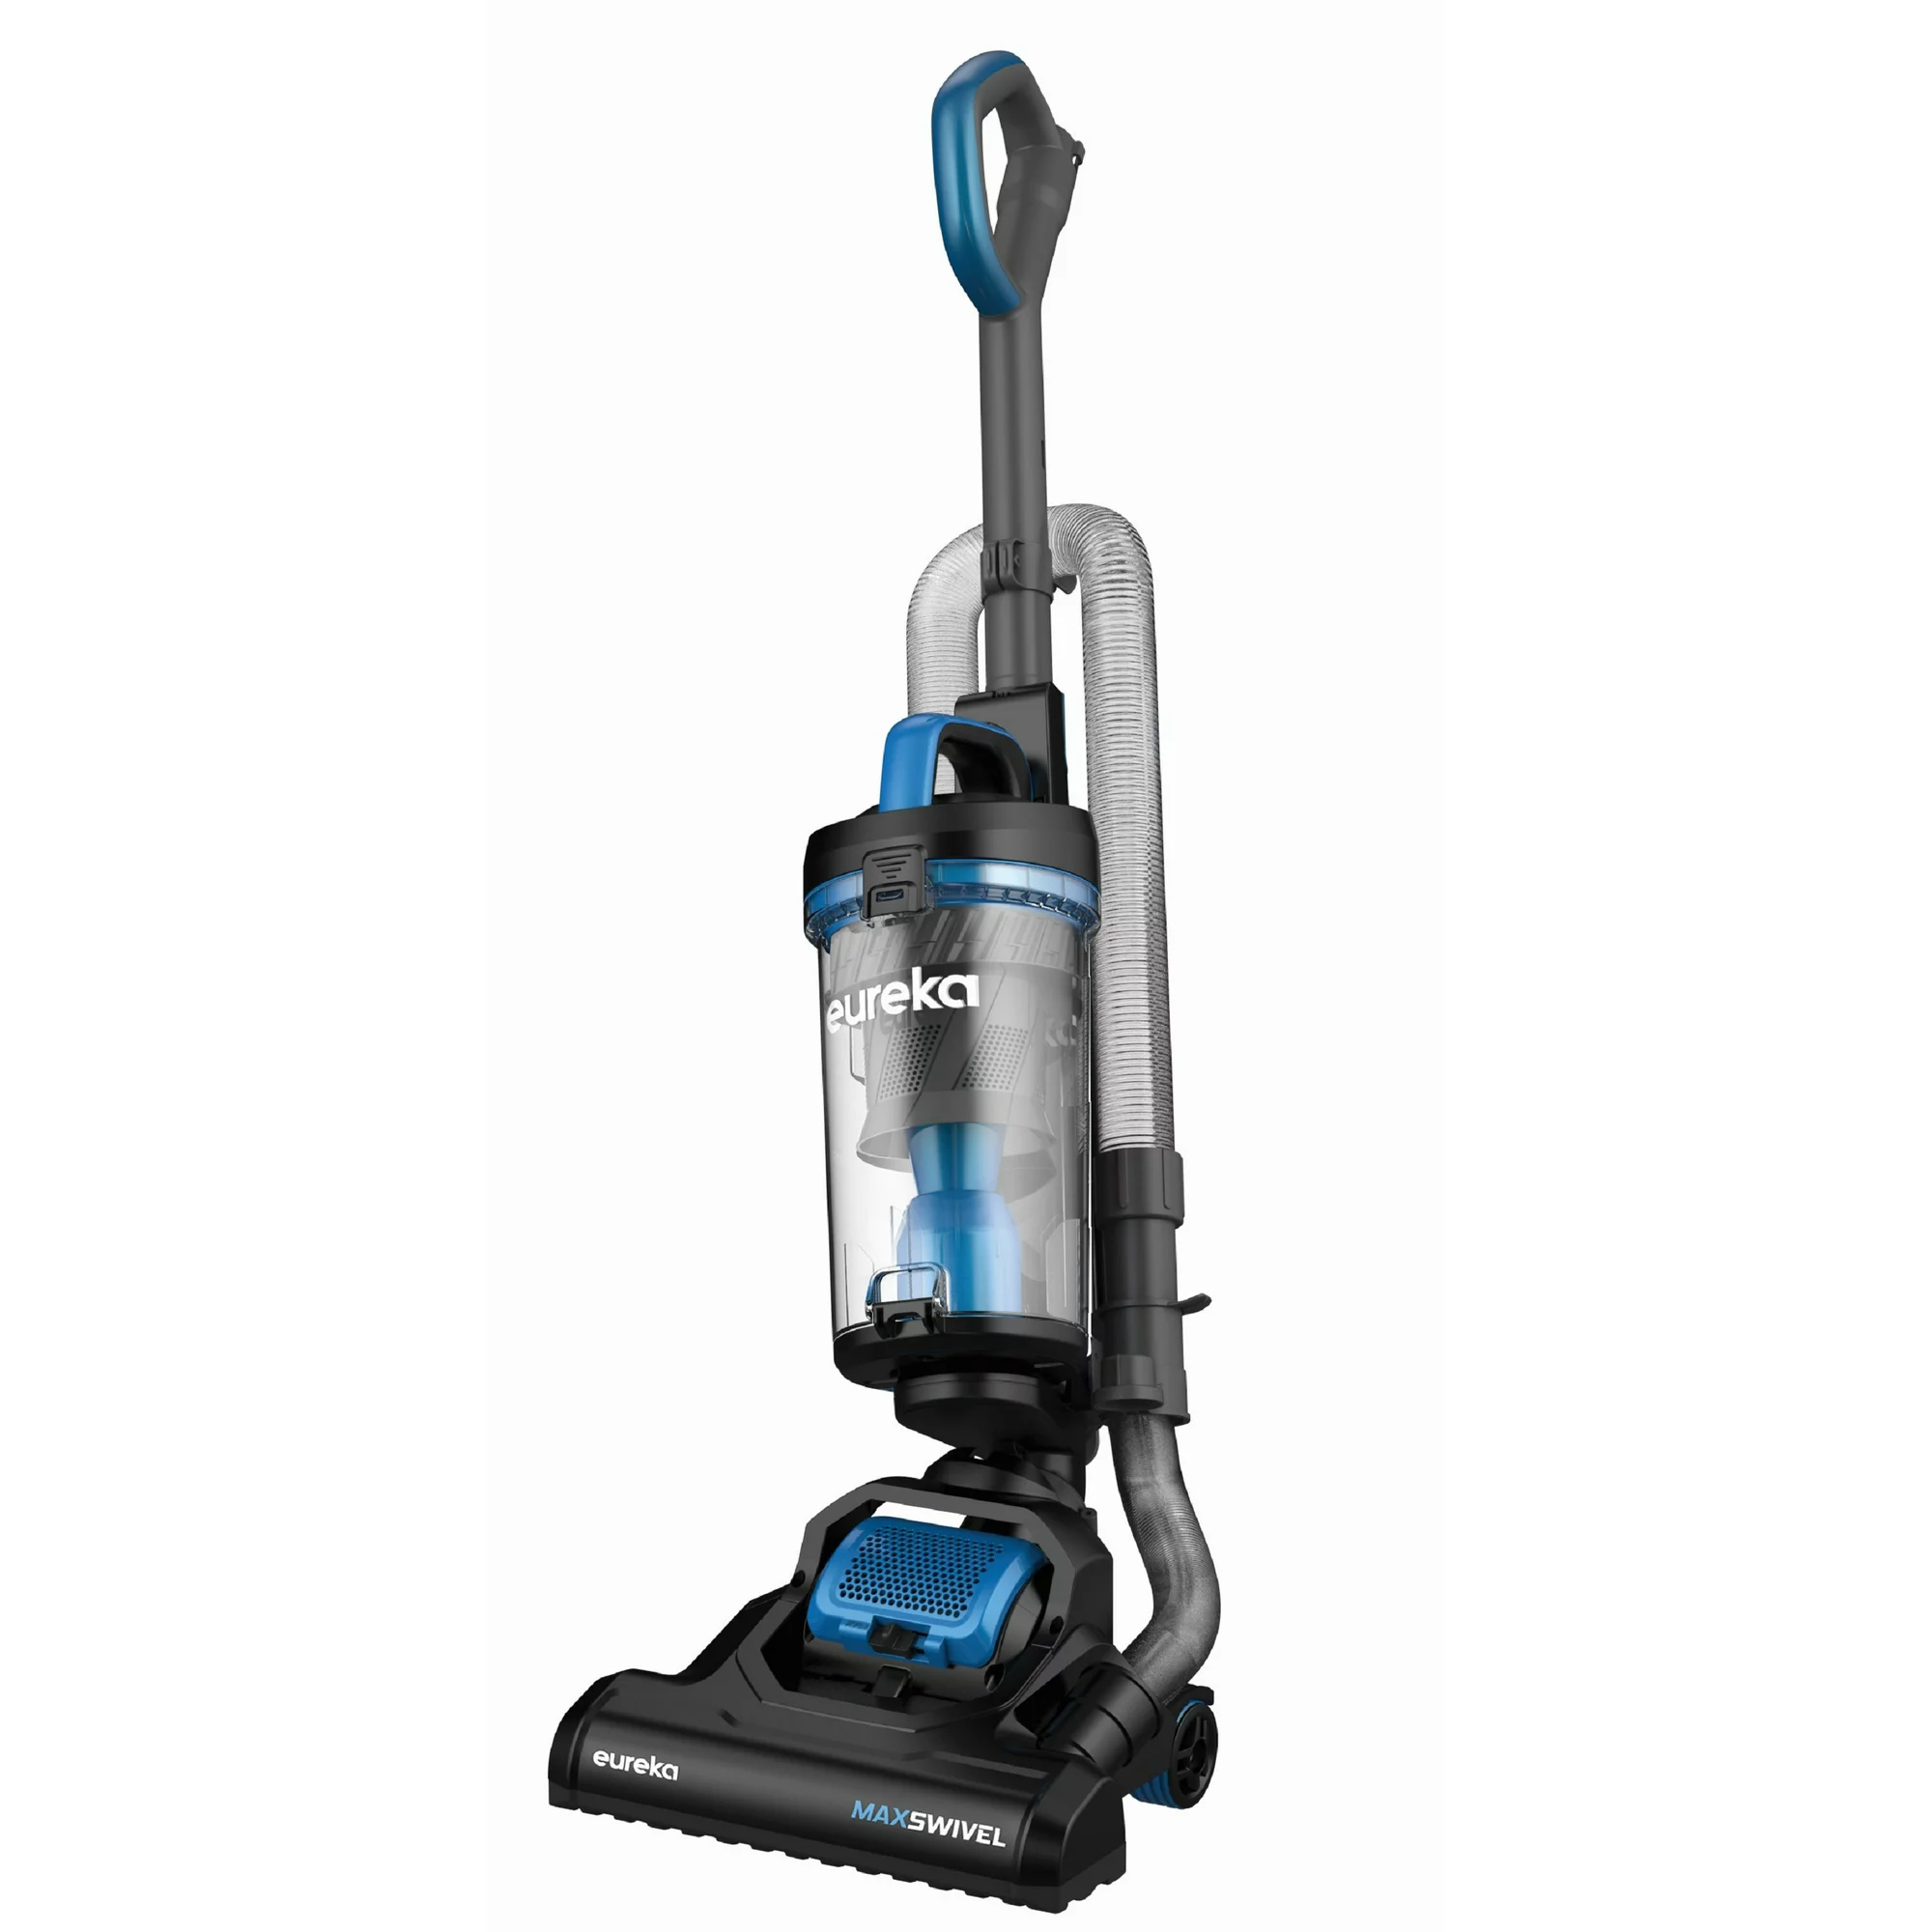 Eureka Max Swivel Deluxe Upright Multi-Surface Vacuum with No Loss of Suction & Swivel Steering, NEU250 - image 1 of 7